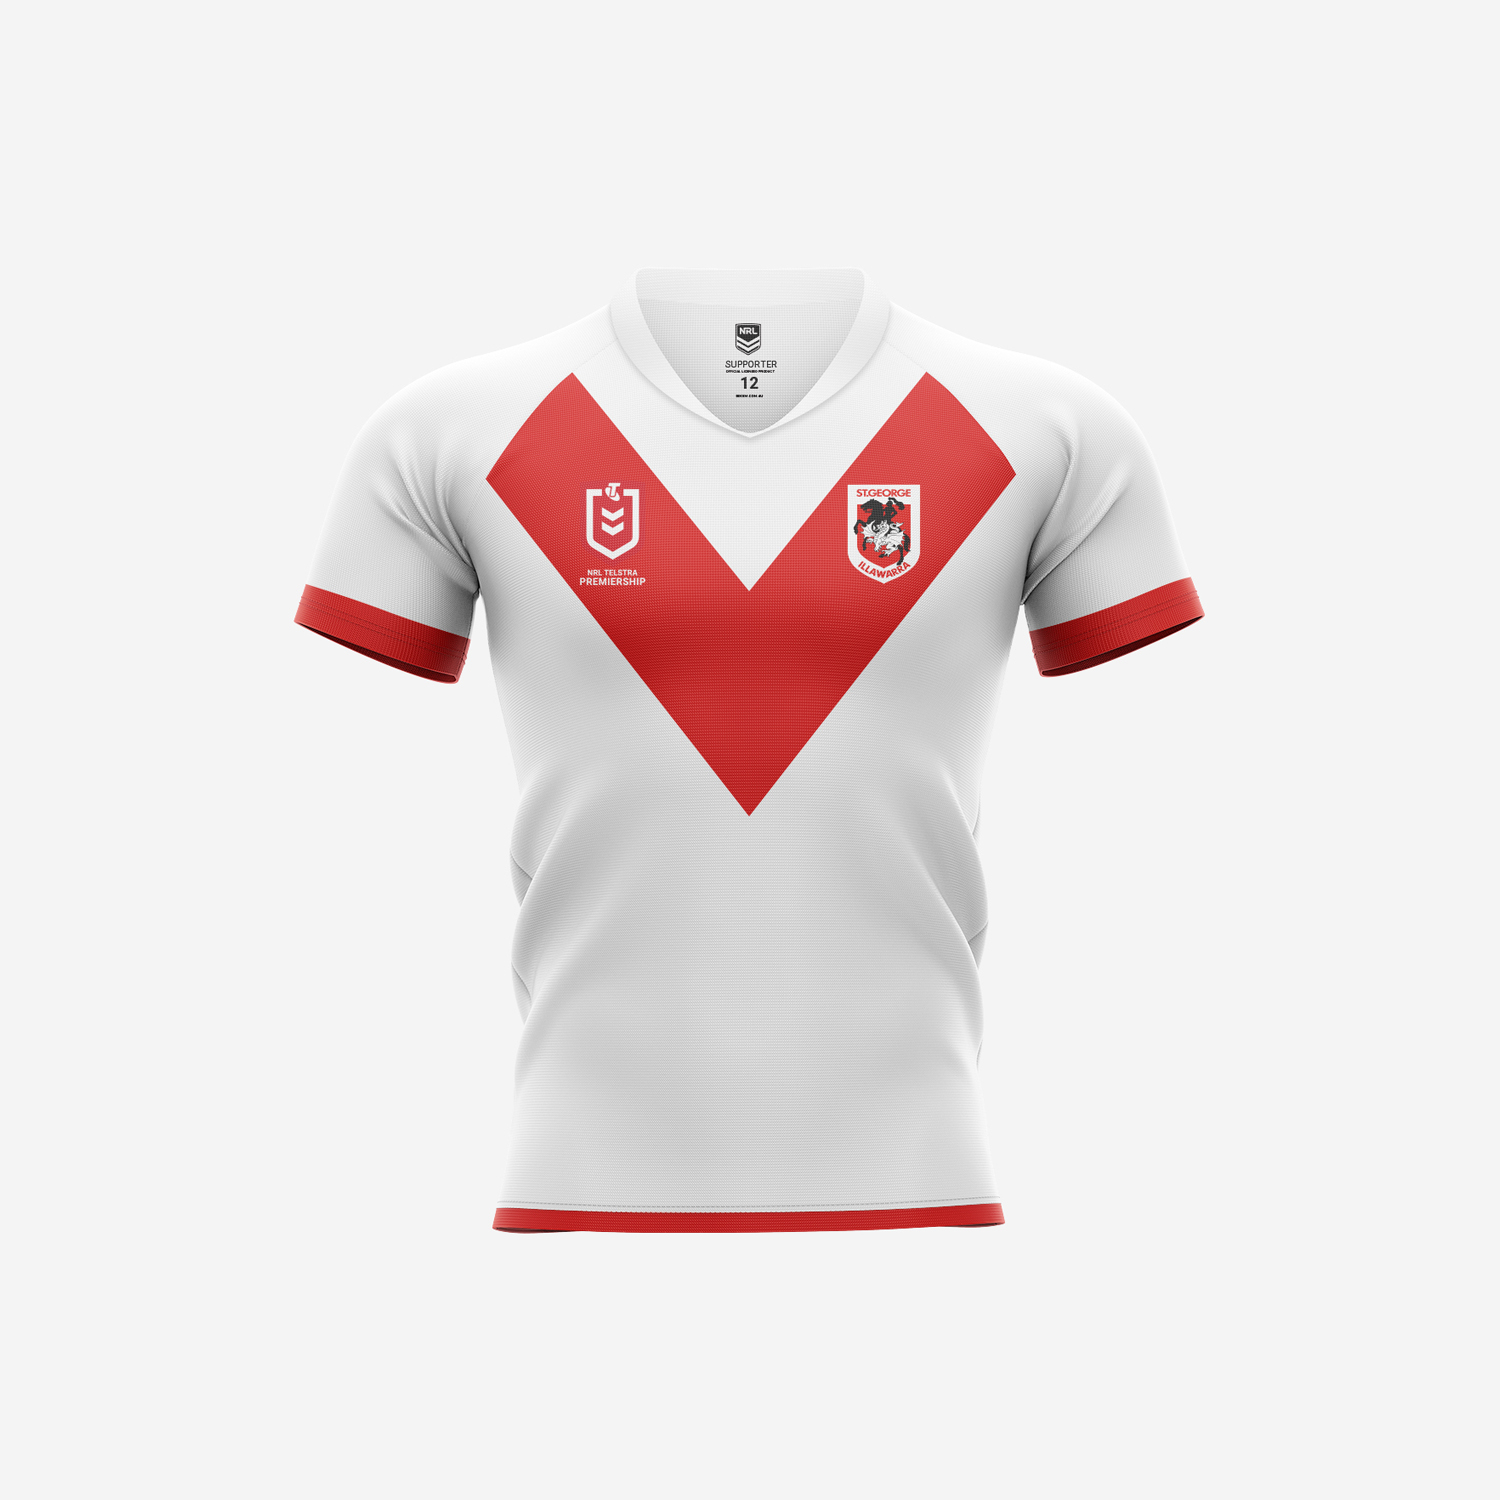 Dragons Youth Jersey